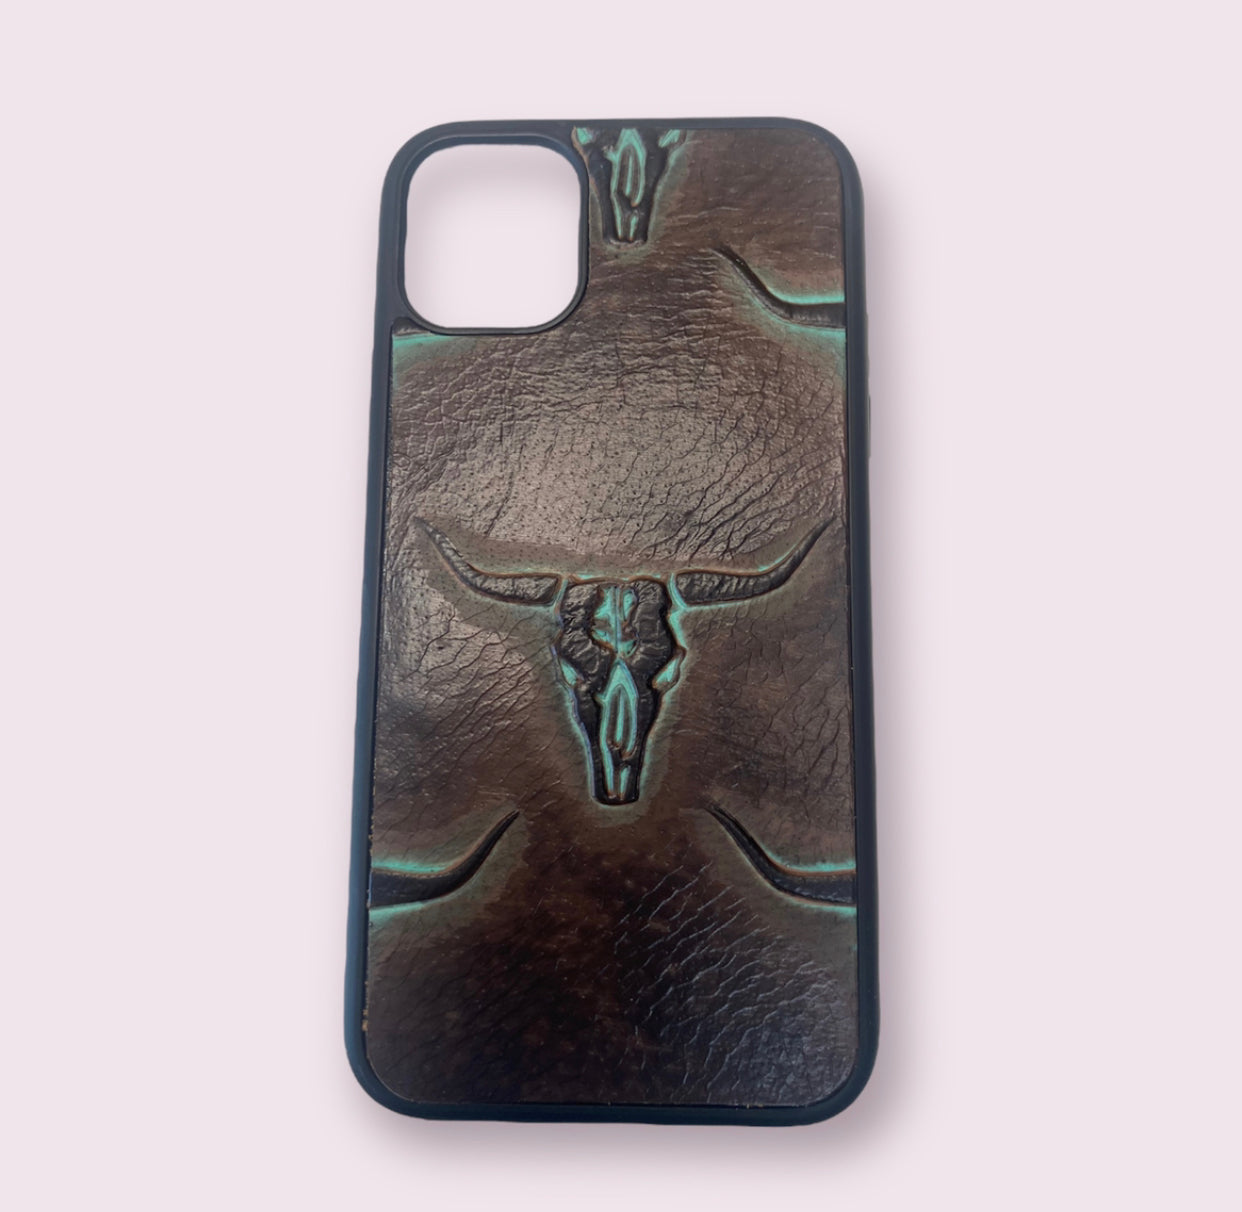 A8363 - IPhone 12 Max Tooled Leather Case